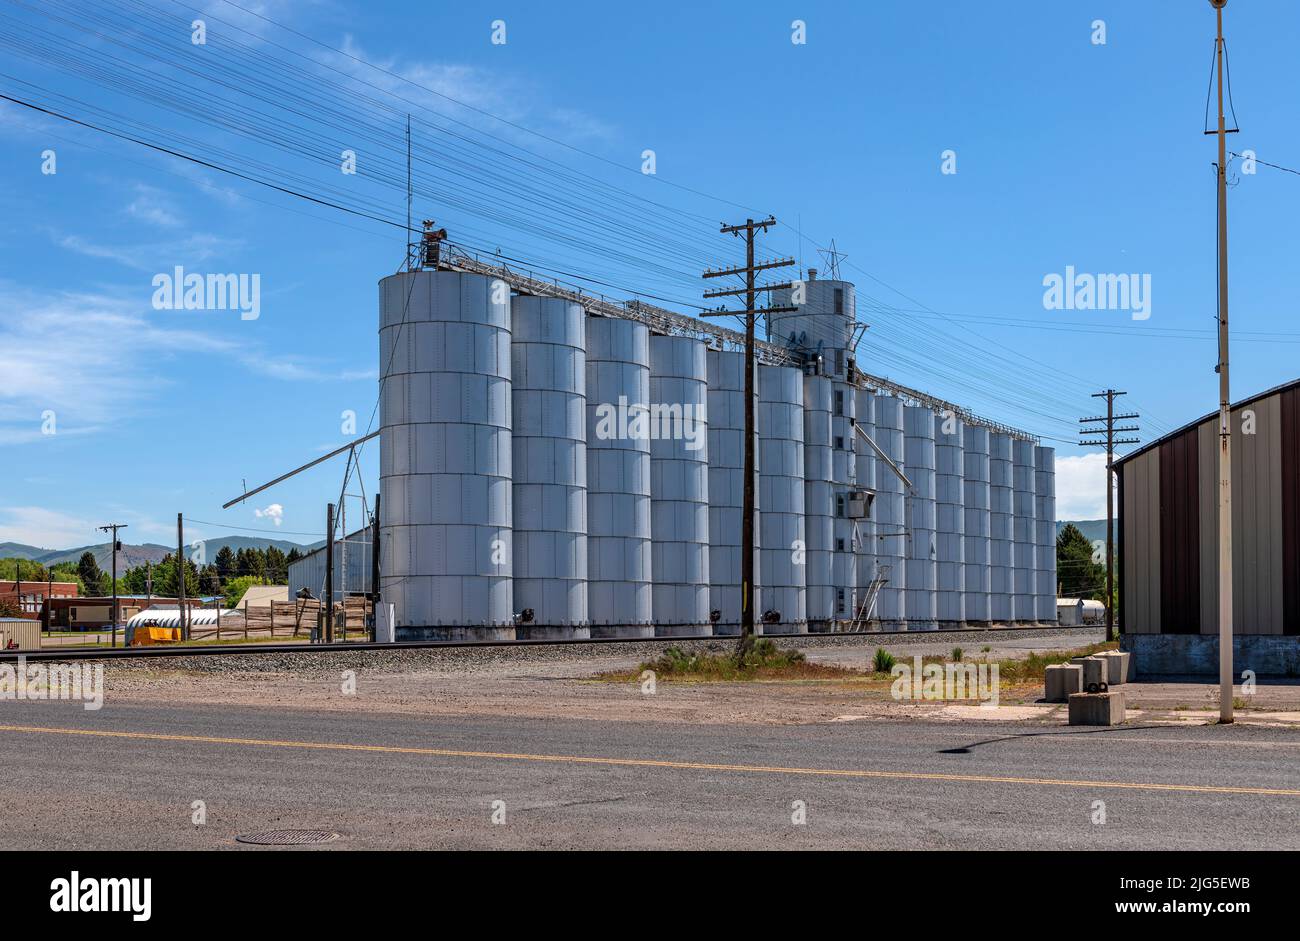 Grain elevators and storage facility for distribution in Idaho state. Stock Photo